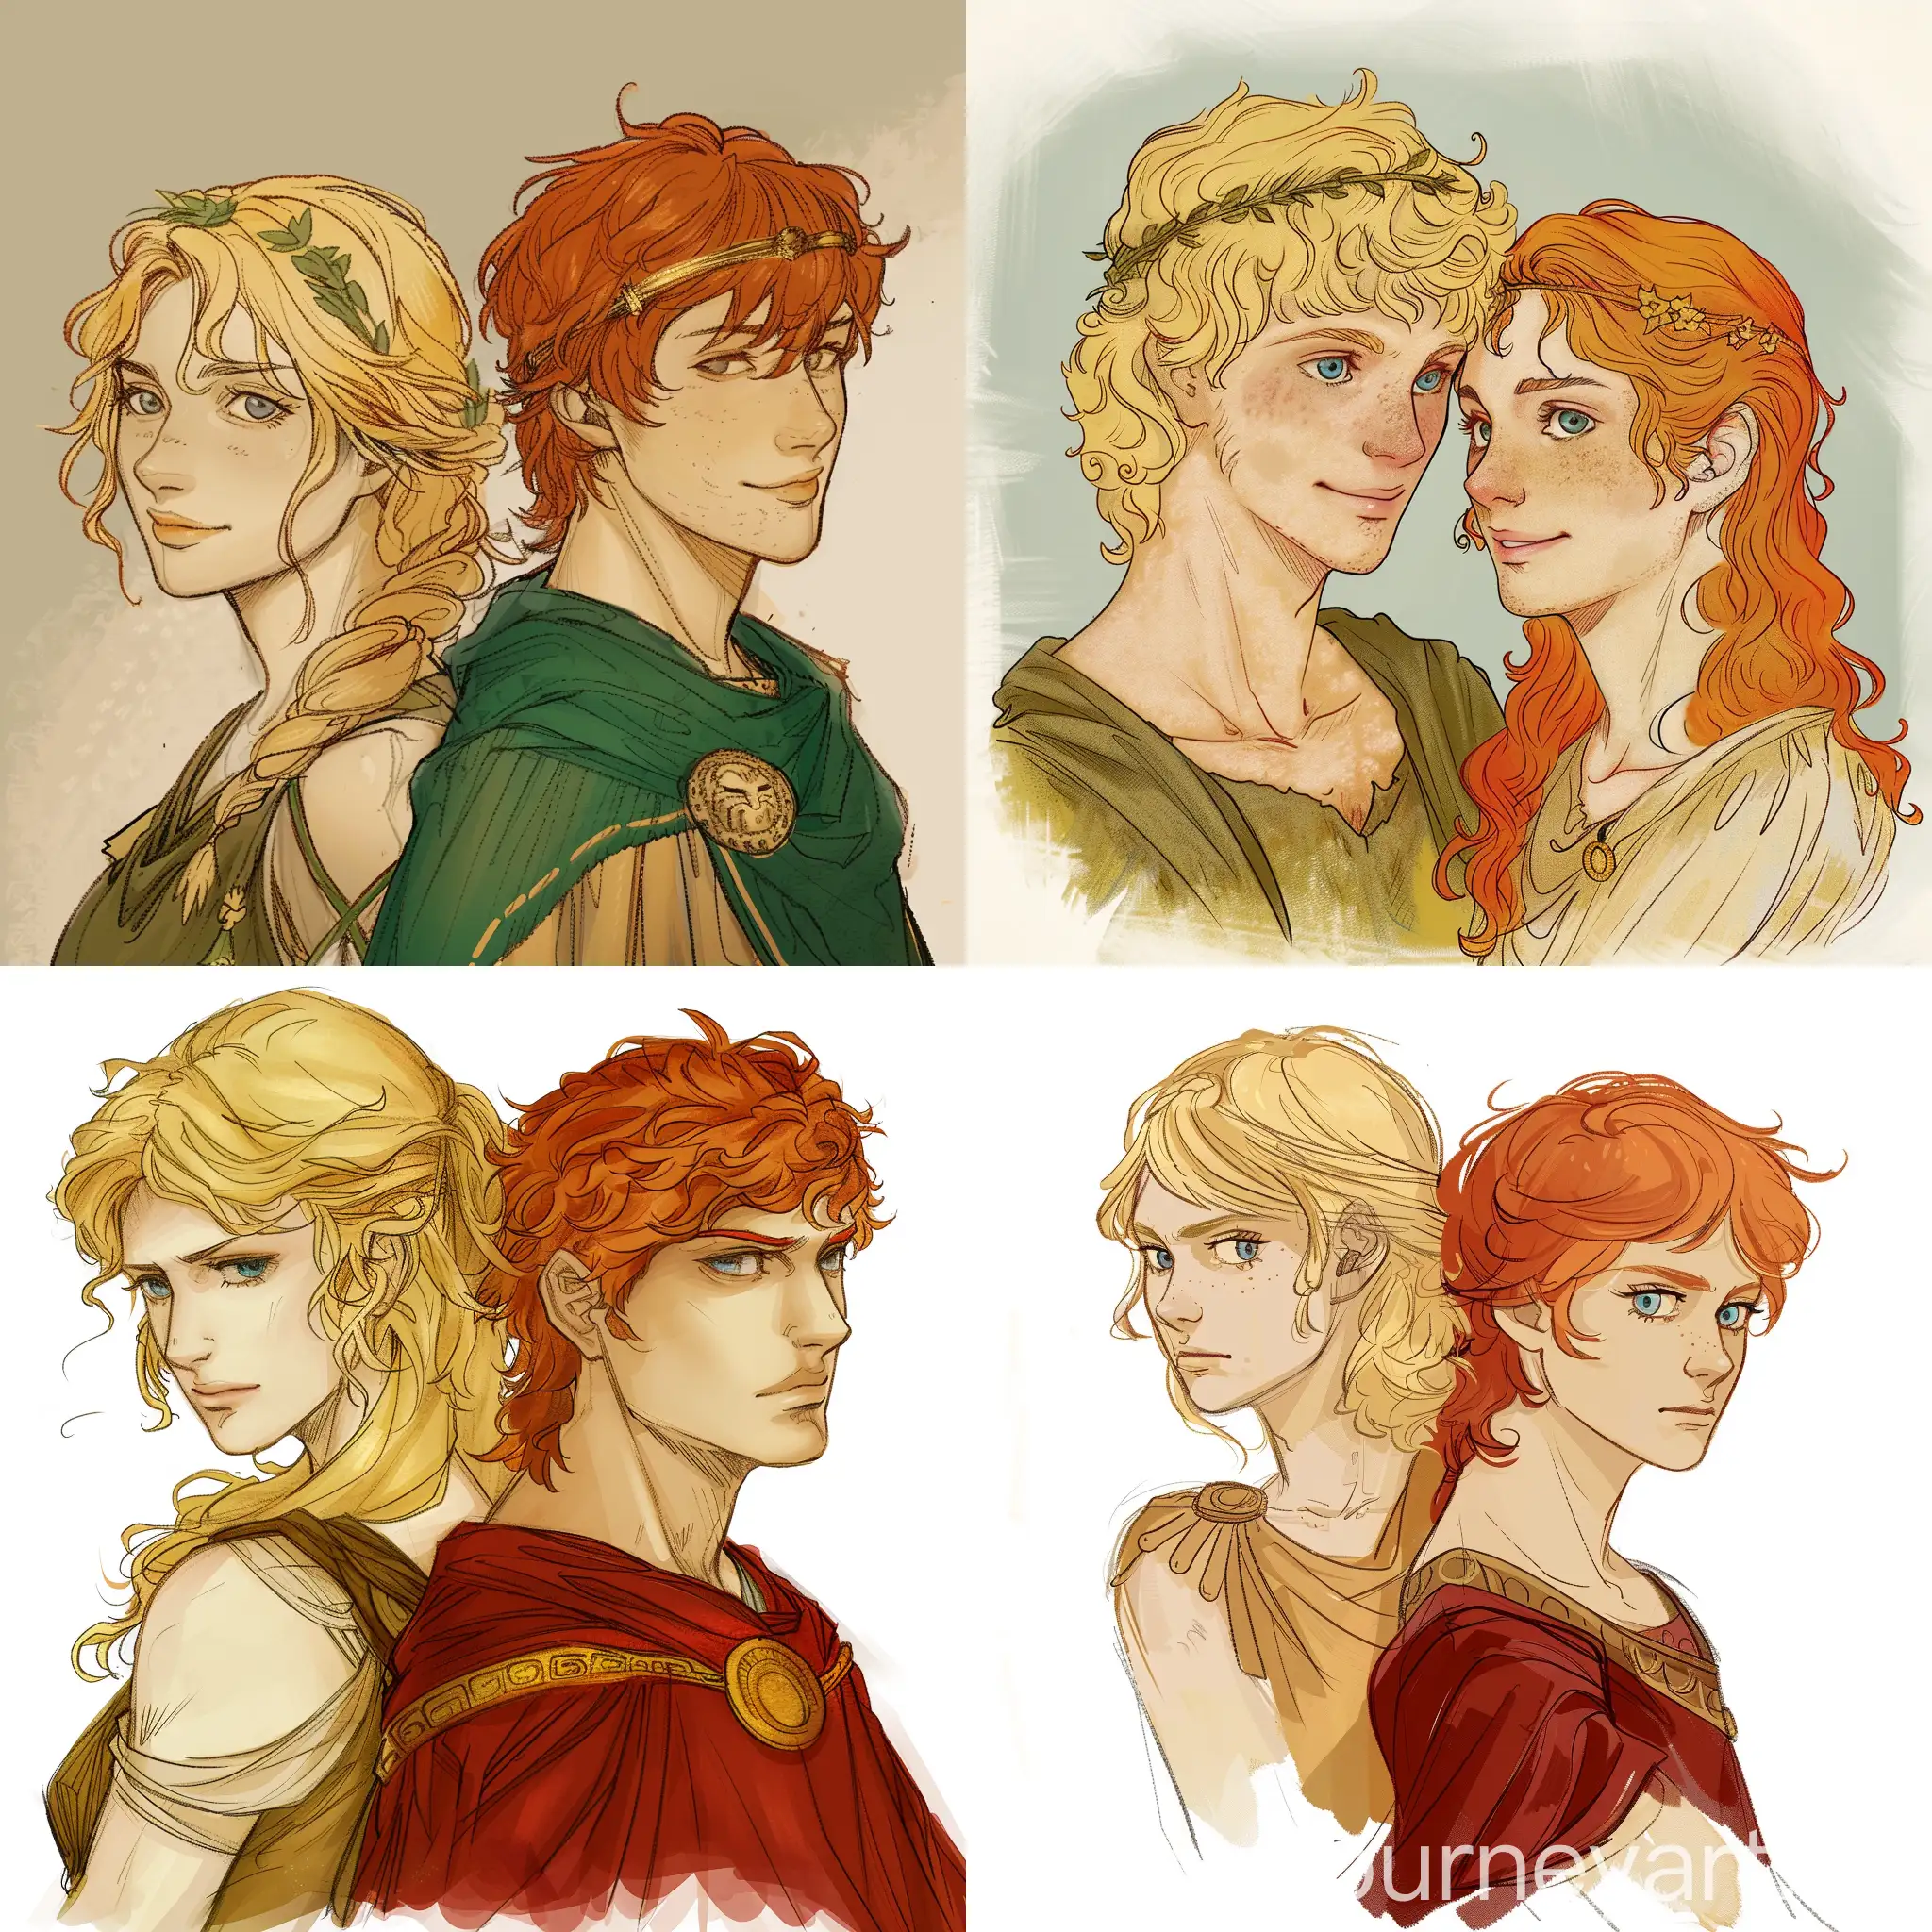 Blonde-Woman-and-RedHaired-Man-in-a-Classical-Greek-Setting